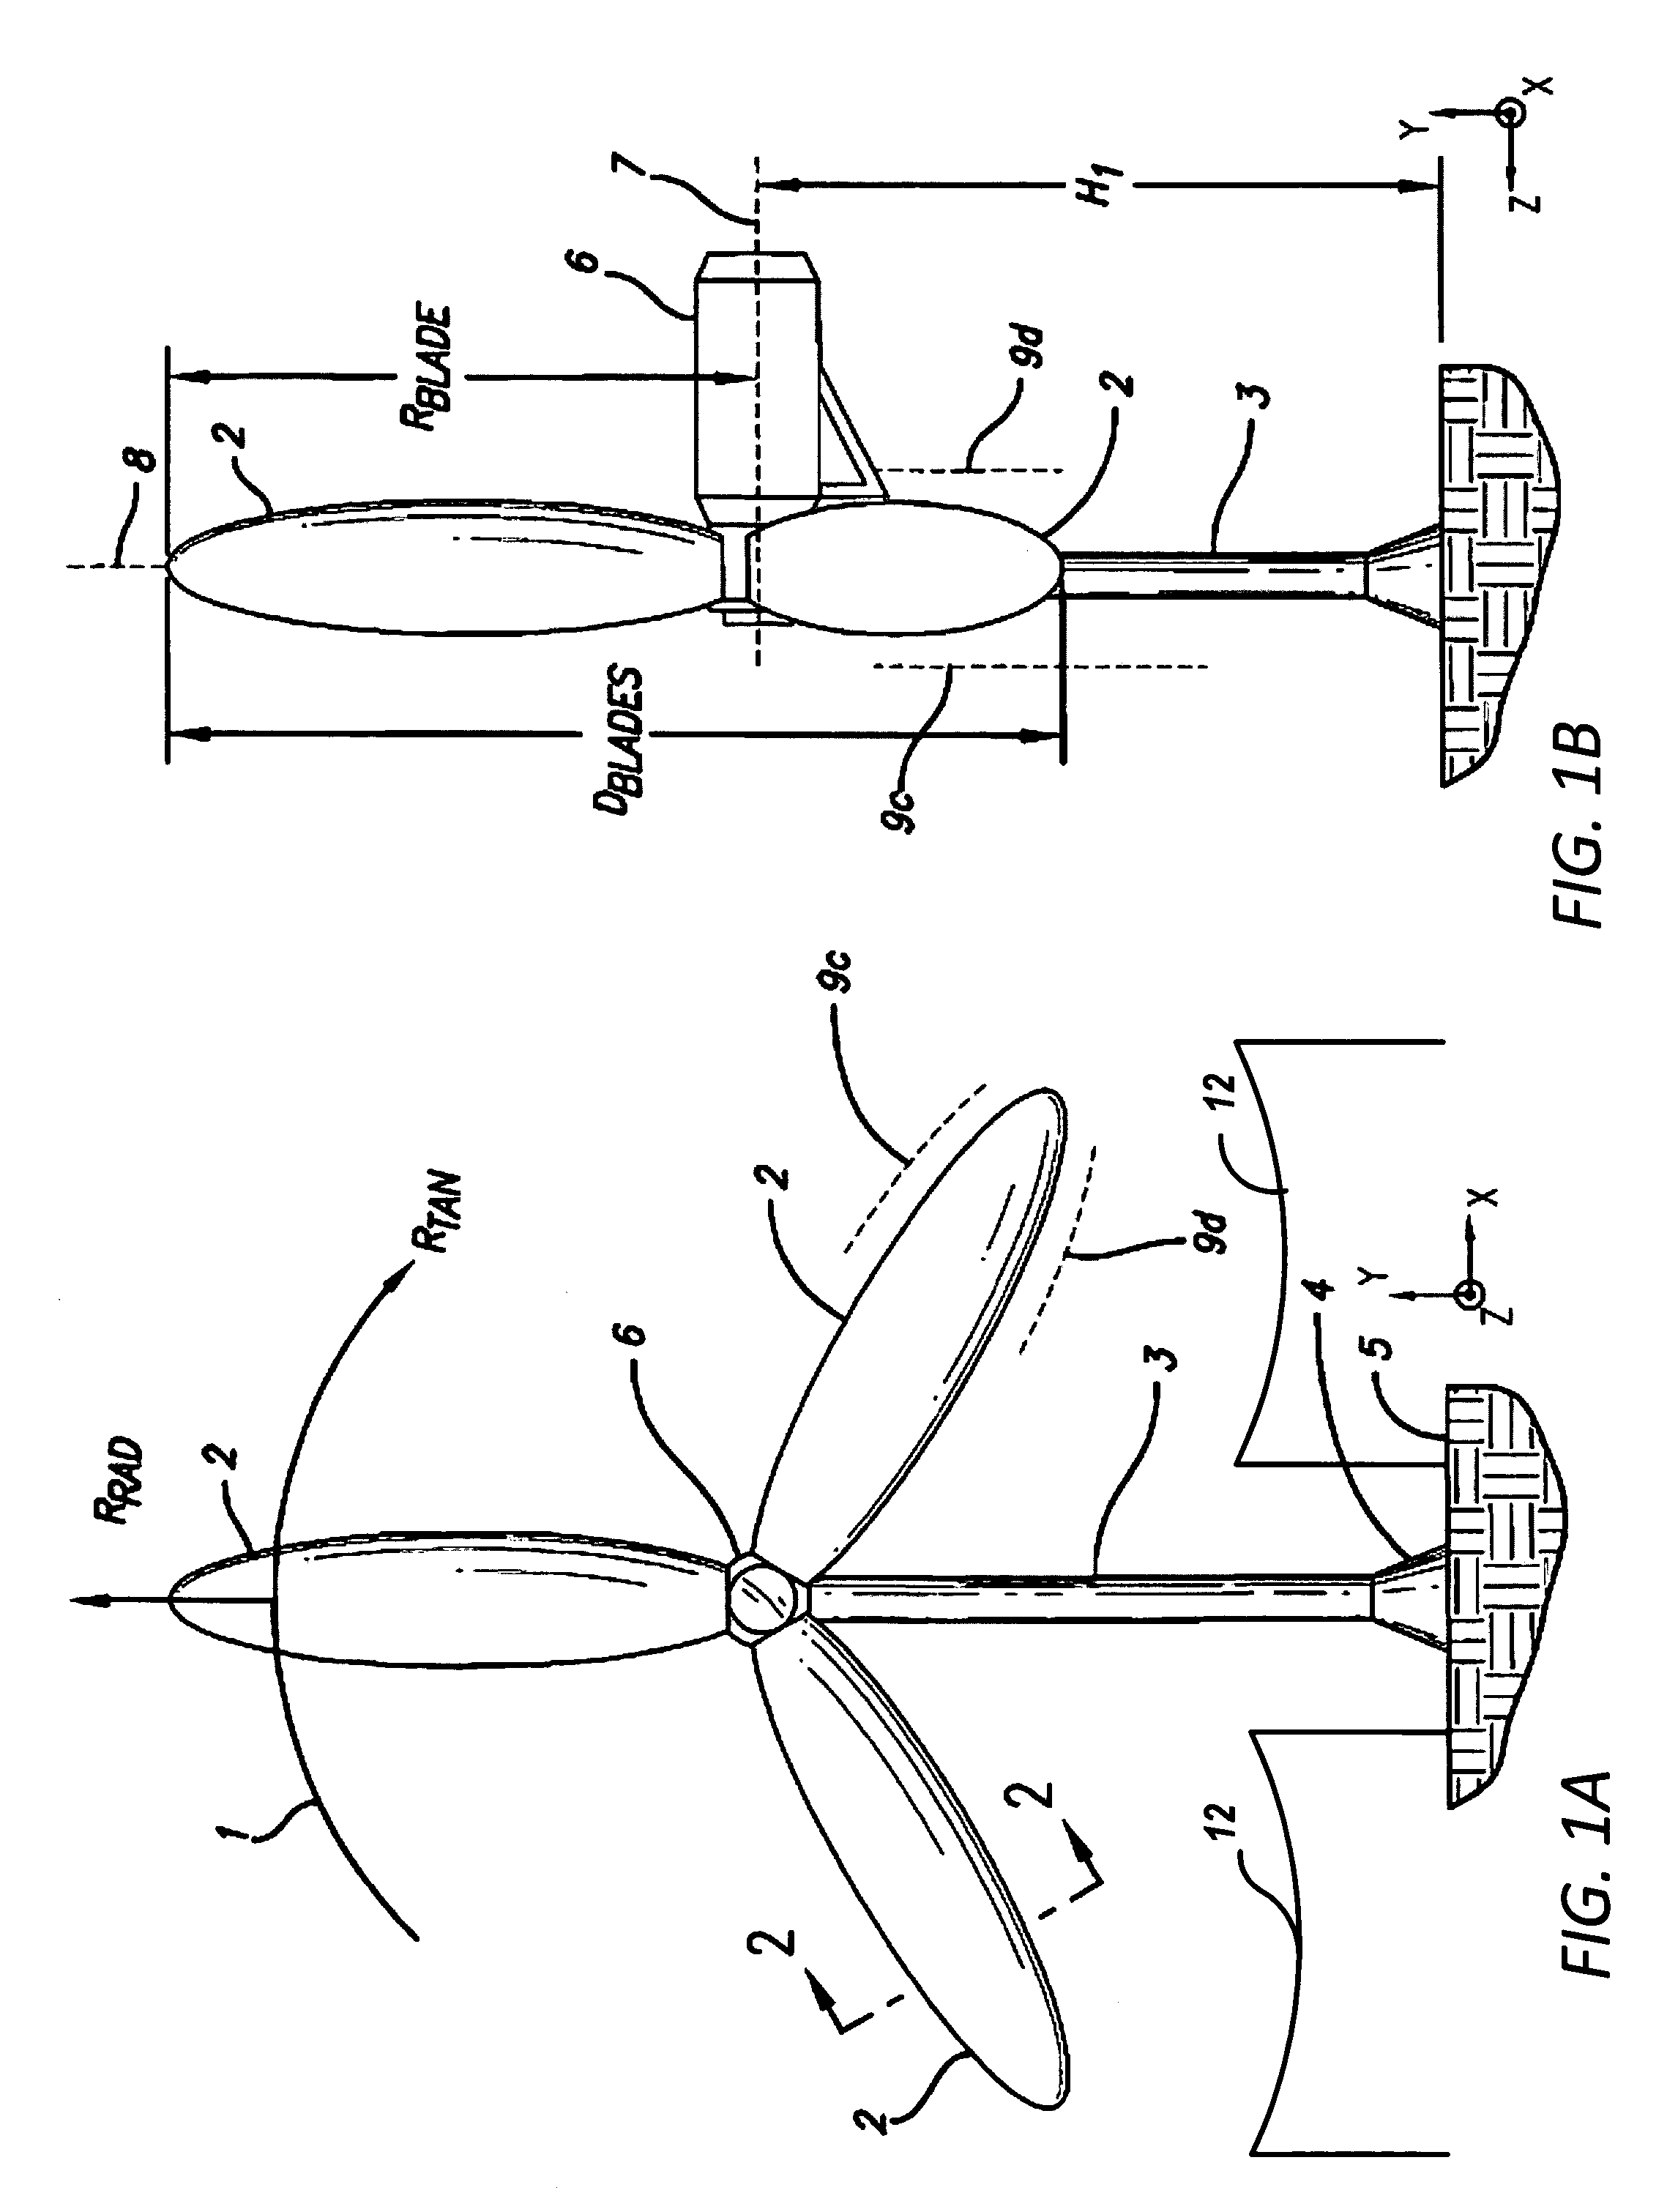 Method and apparatus for reducing bird and fish injuries and deaths at wind and water-turbine power-generation sites